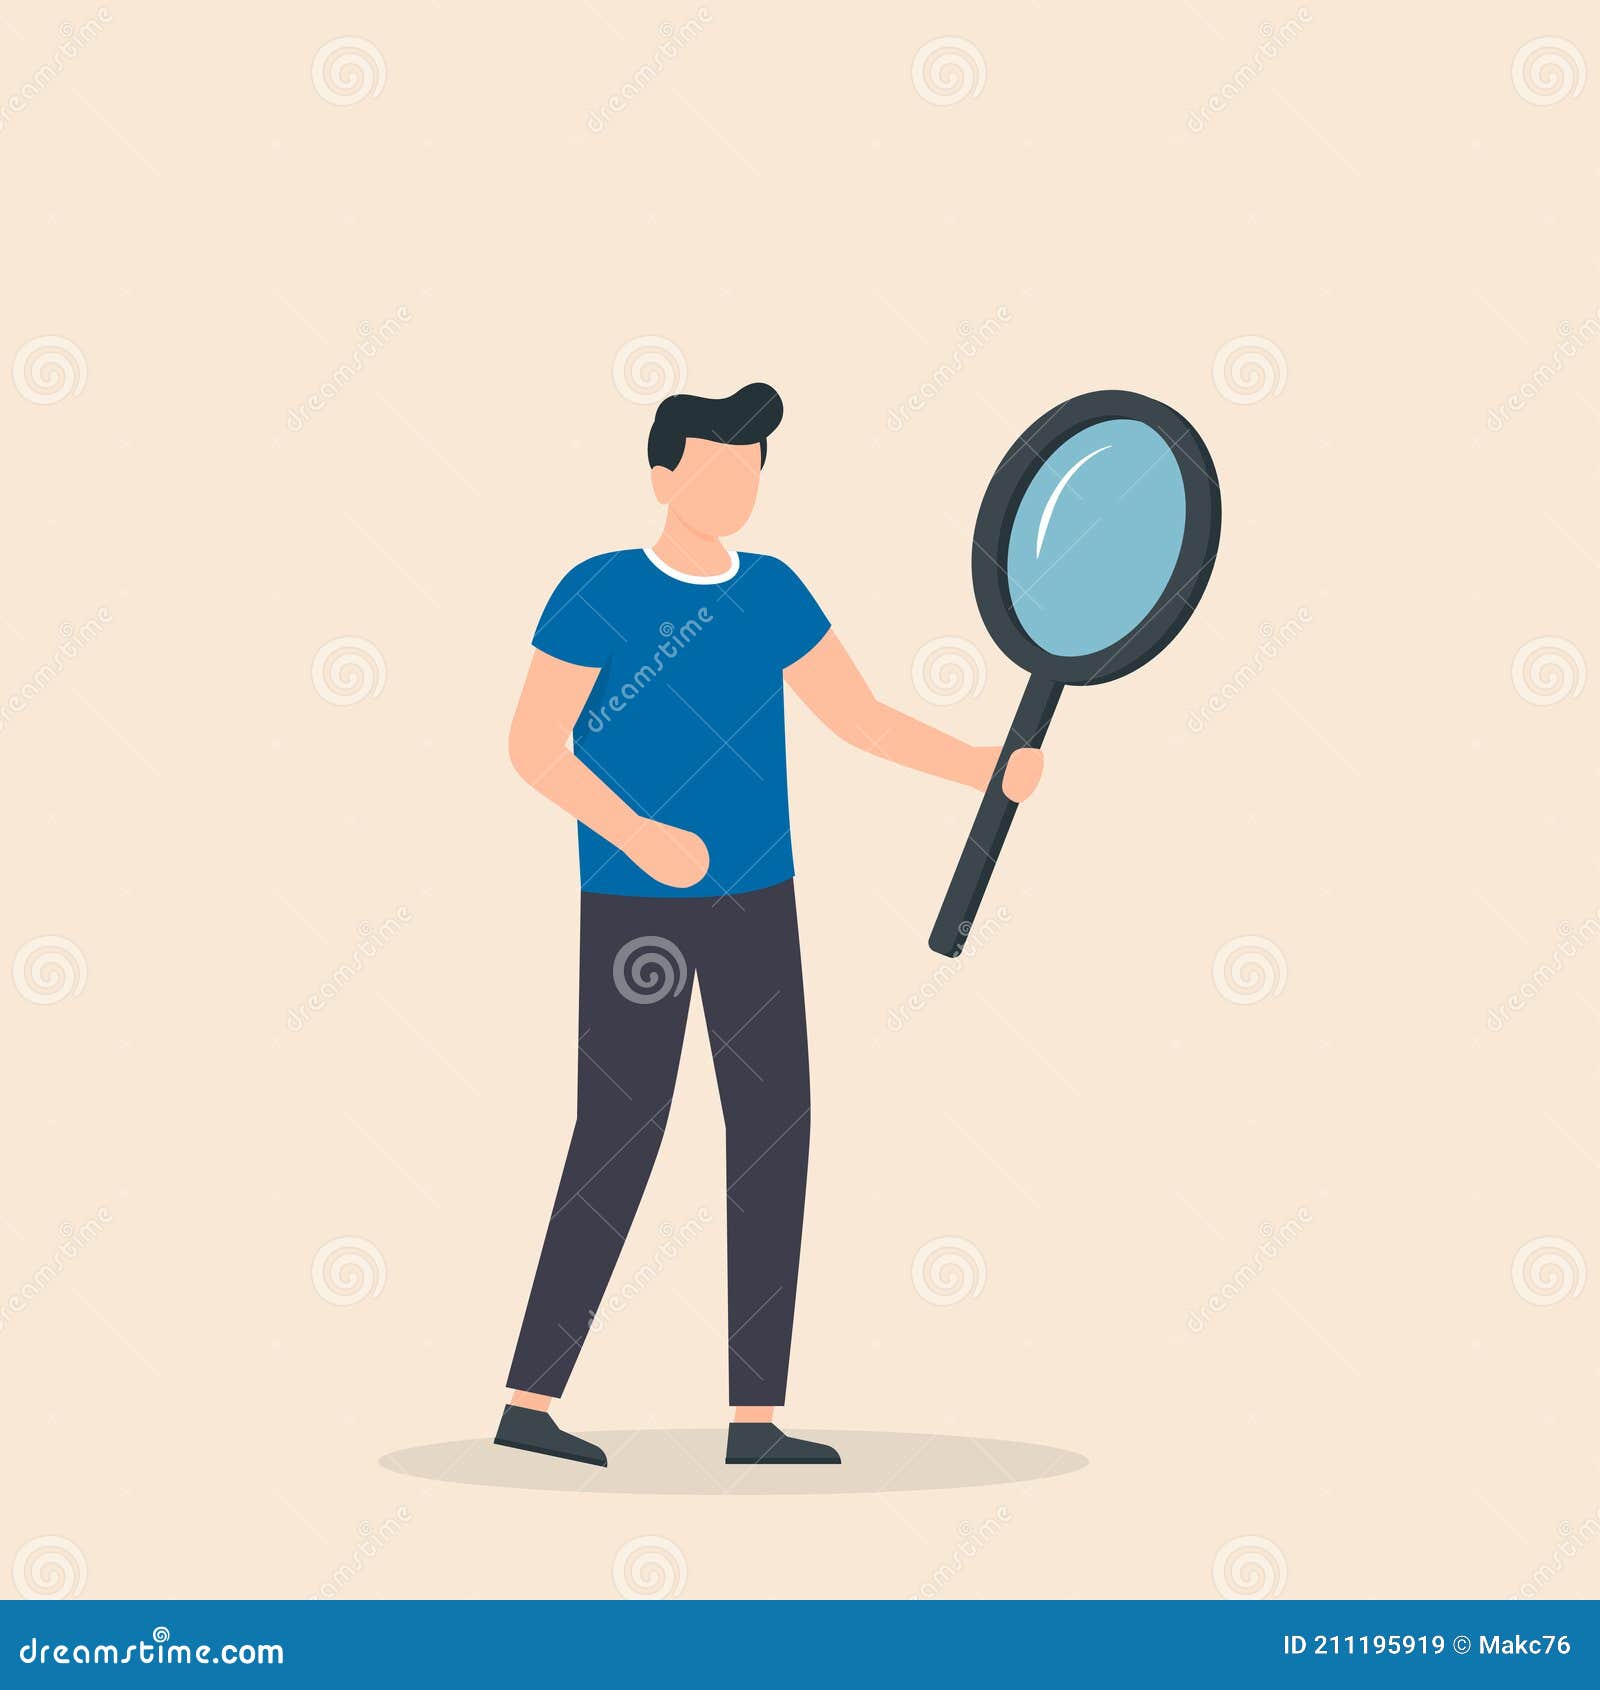 Searching Cartoons, Illustrations & Vector Stock Images - 92384 ...